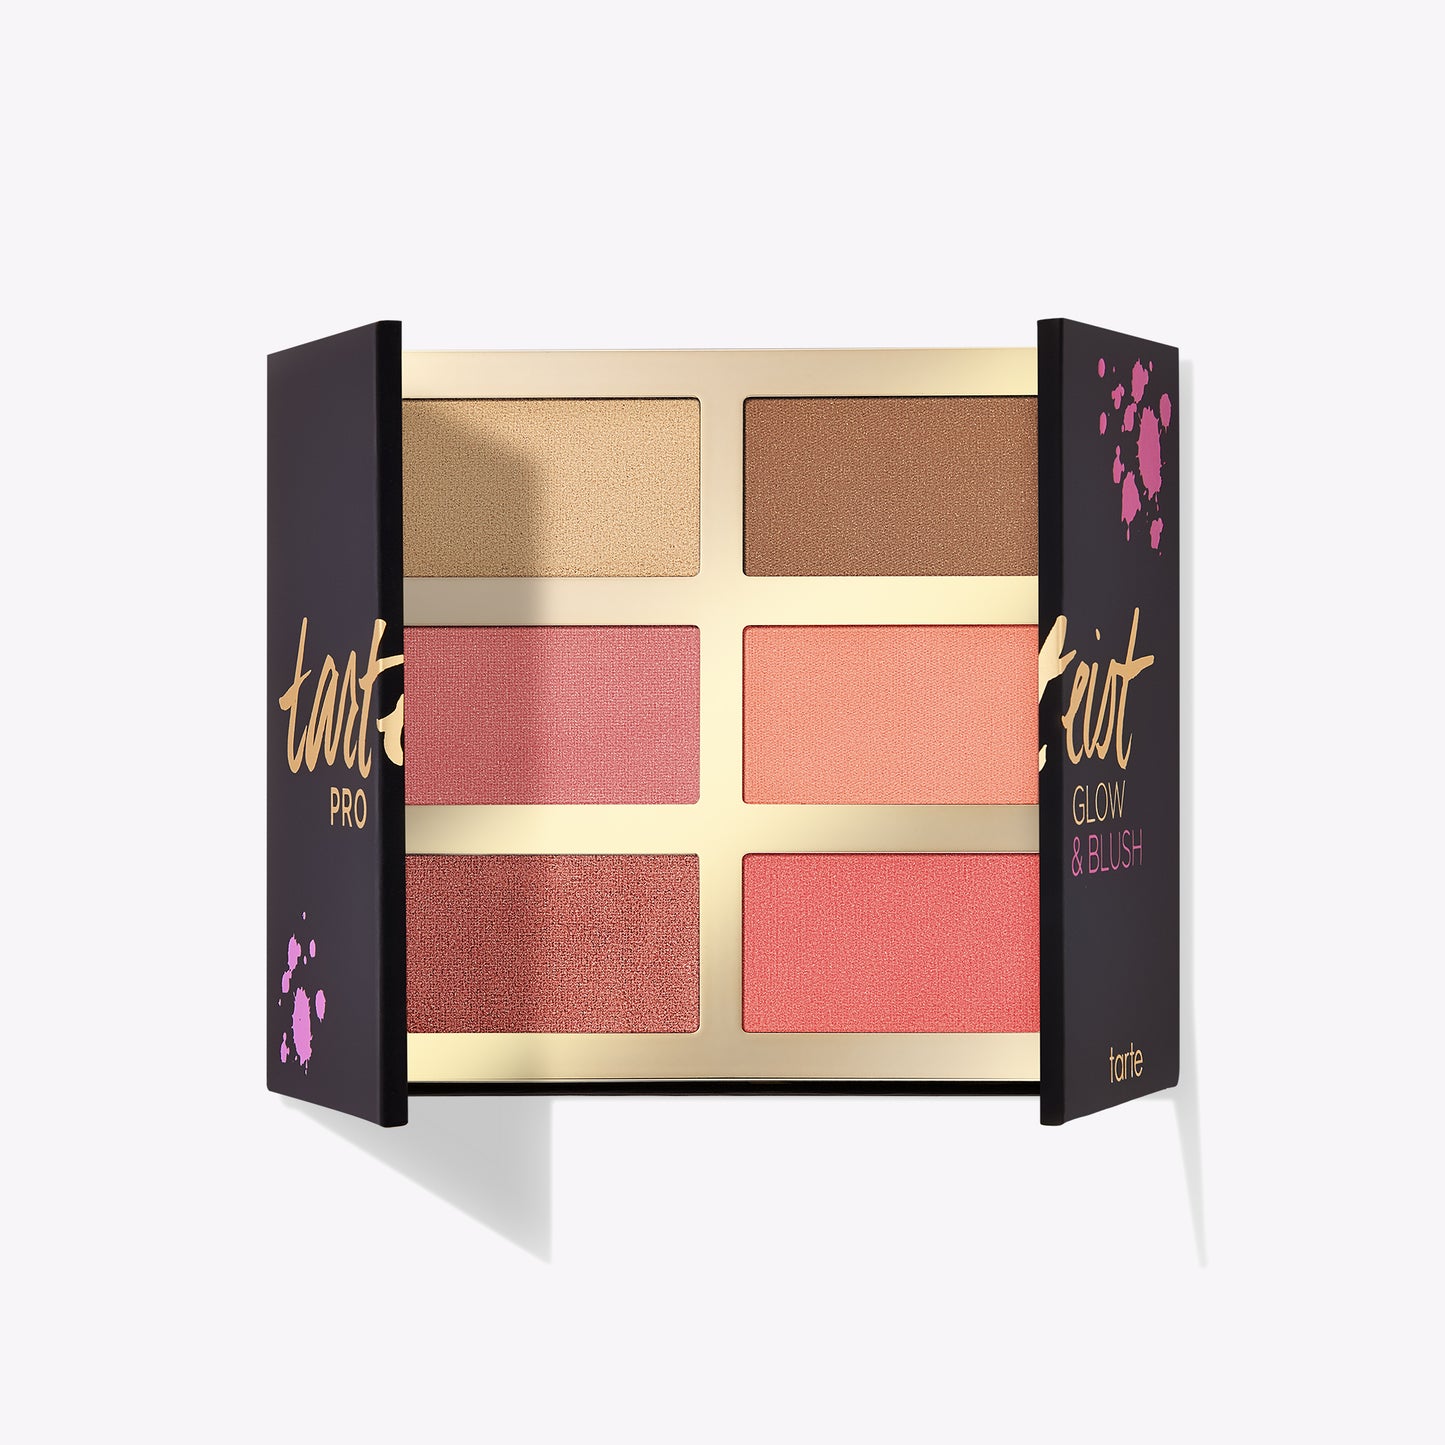 Tarte Pro Glow and Blush palette available at Heygirl.pk for delivery in Karachi, lahore, islamabad across Pakistan